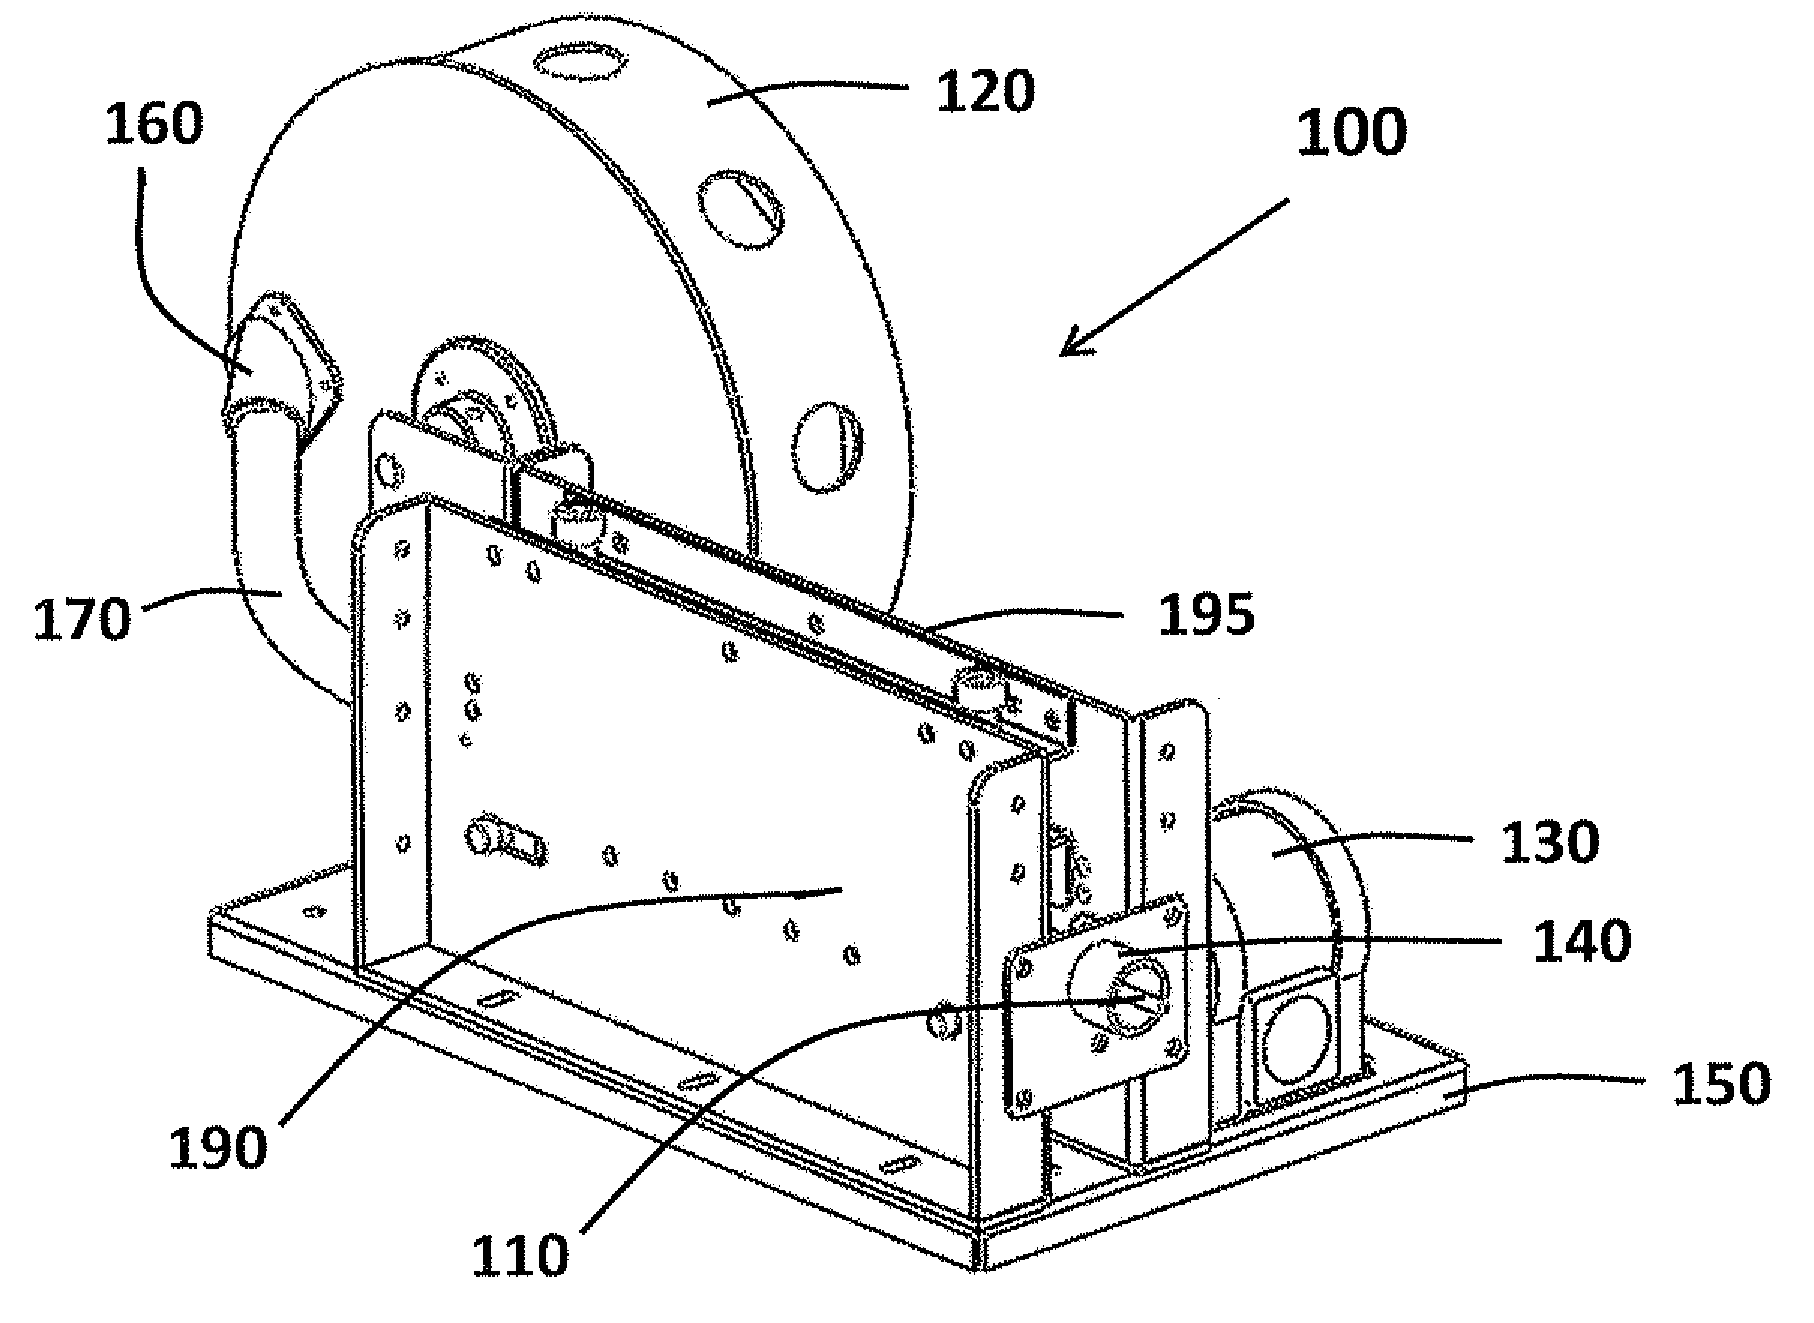 Device and method for fish tape reel system